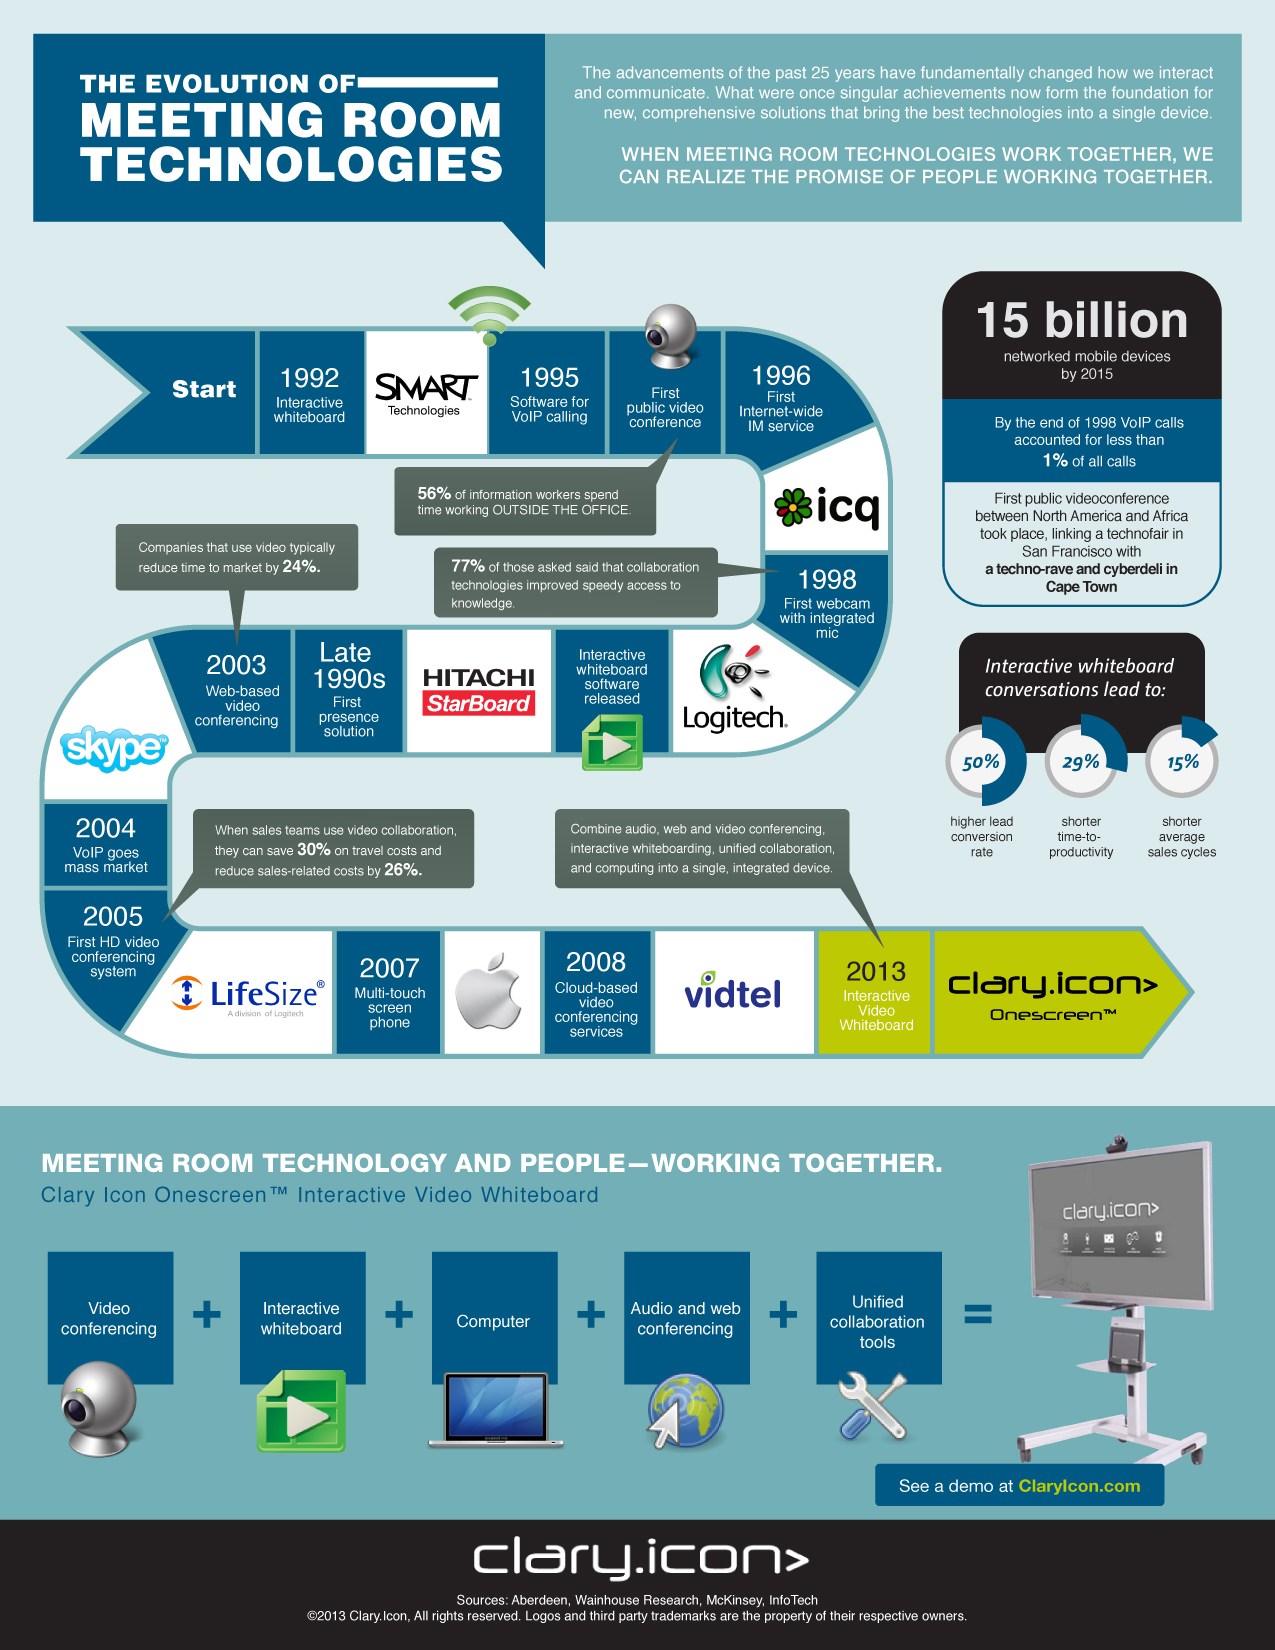 "The Evolution of Meeting Room Technologies" an infographic from Clary Icon.